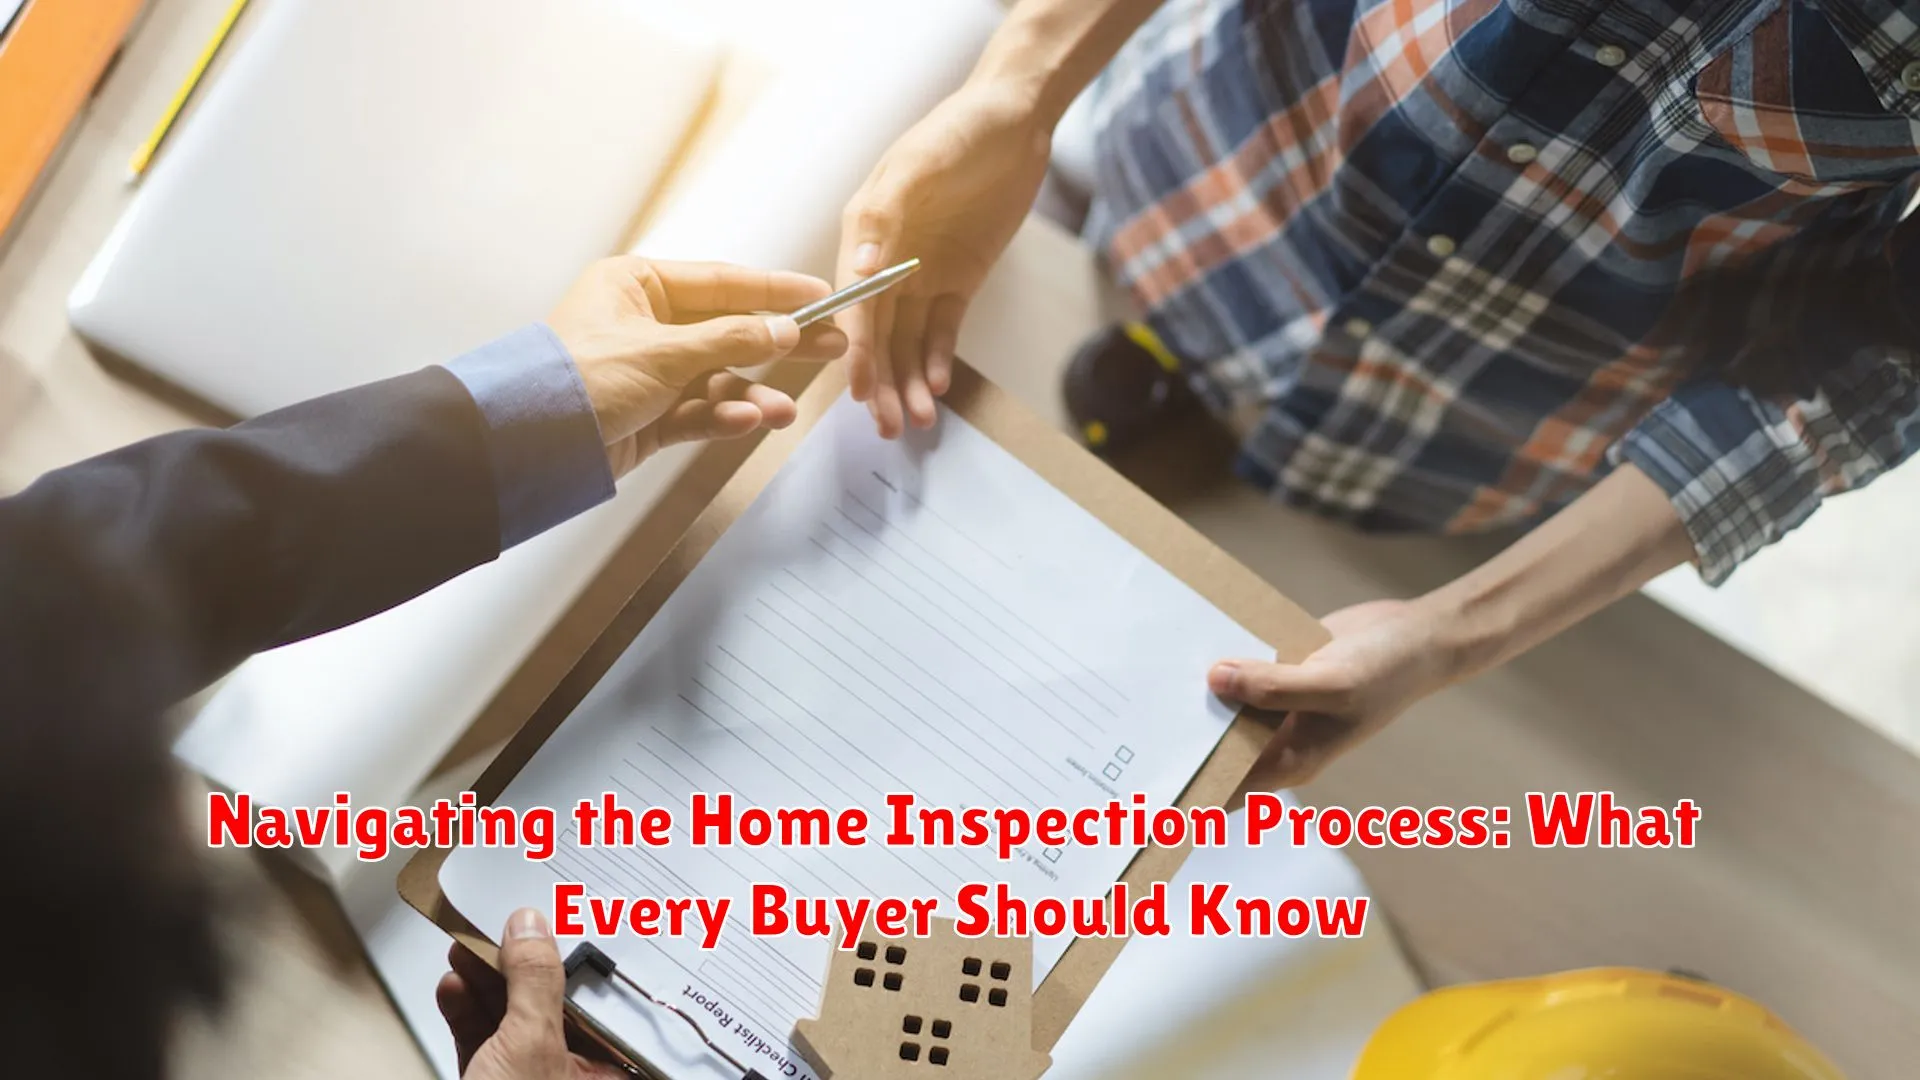 Navigating the Home Inspection Process: What Every Buyer Should Know